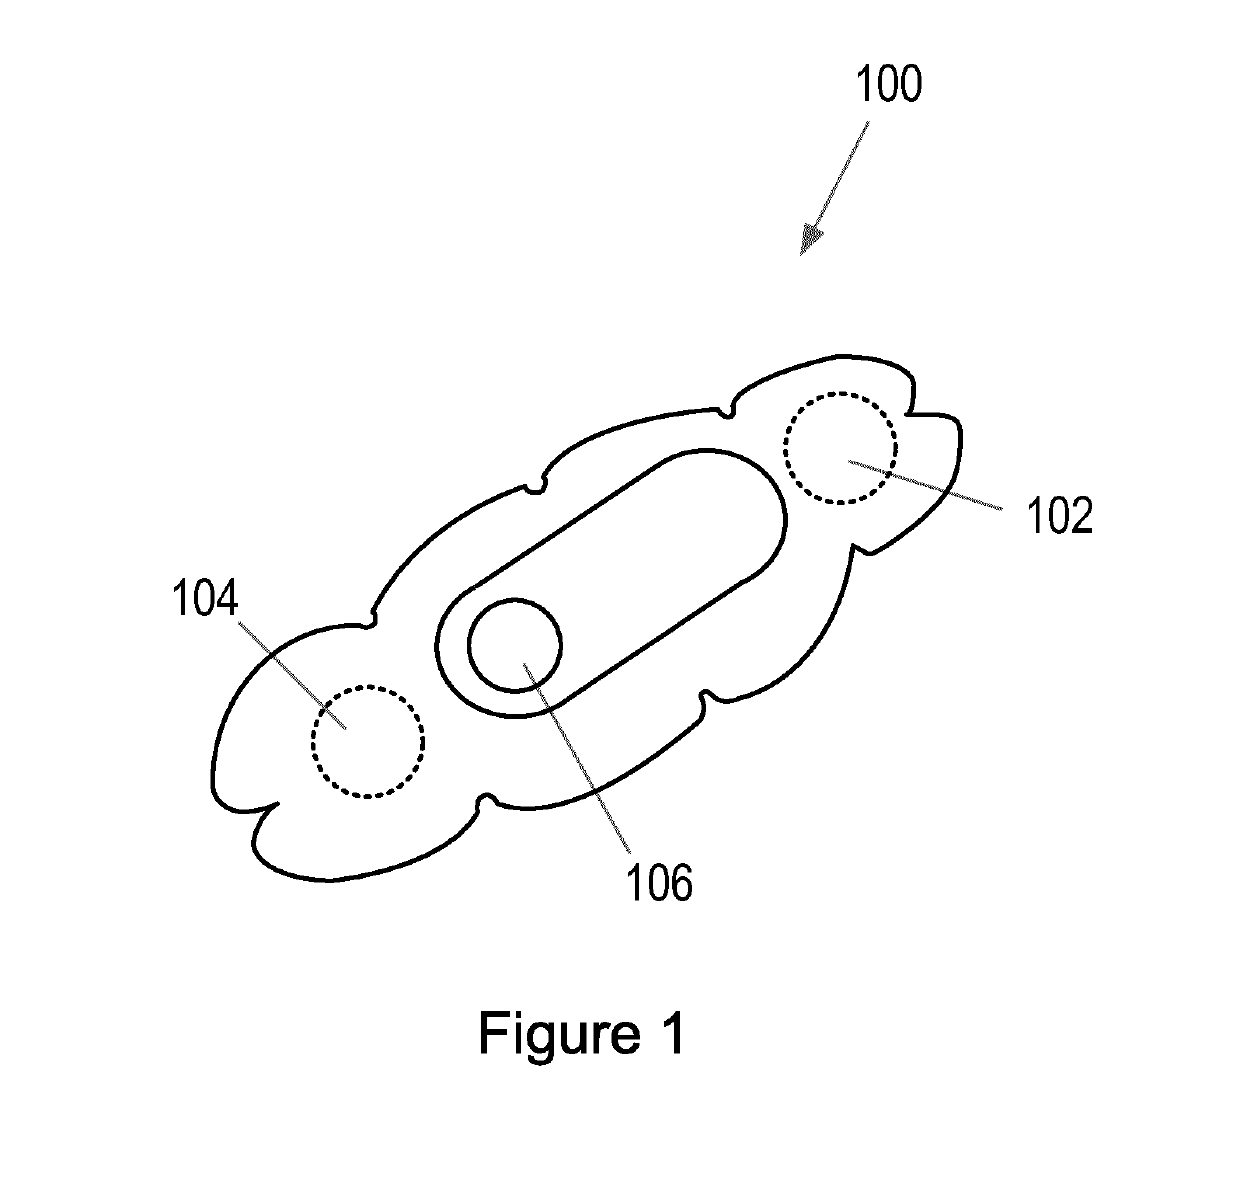 A method and apparatus for determining at least one of a position and an orientation of a wearable device on a subject